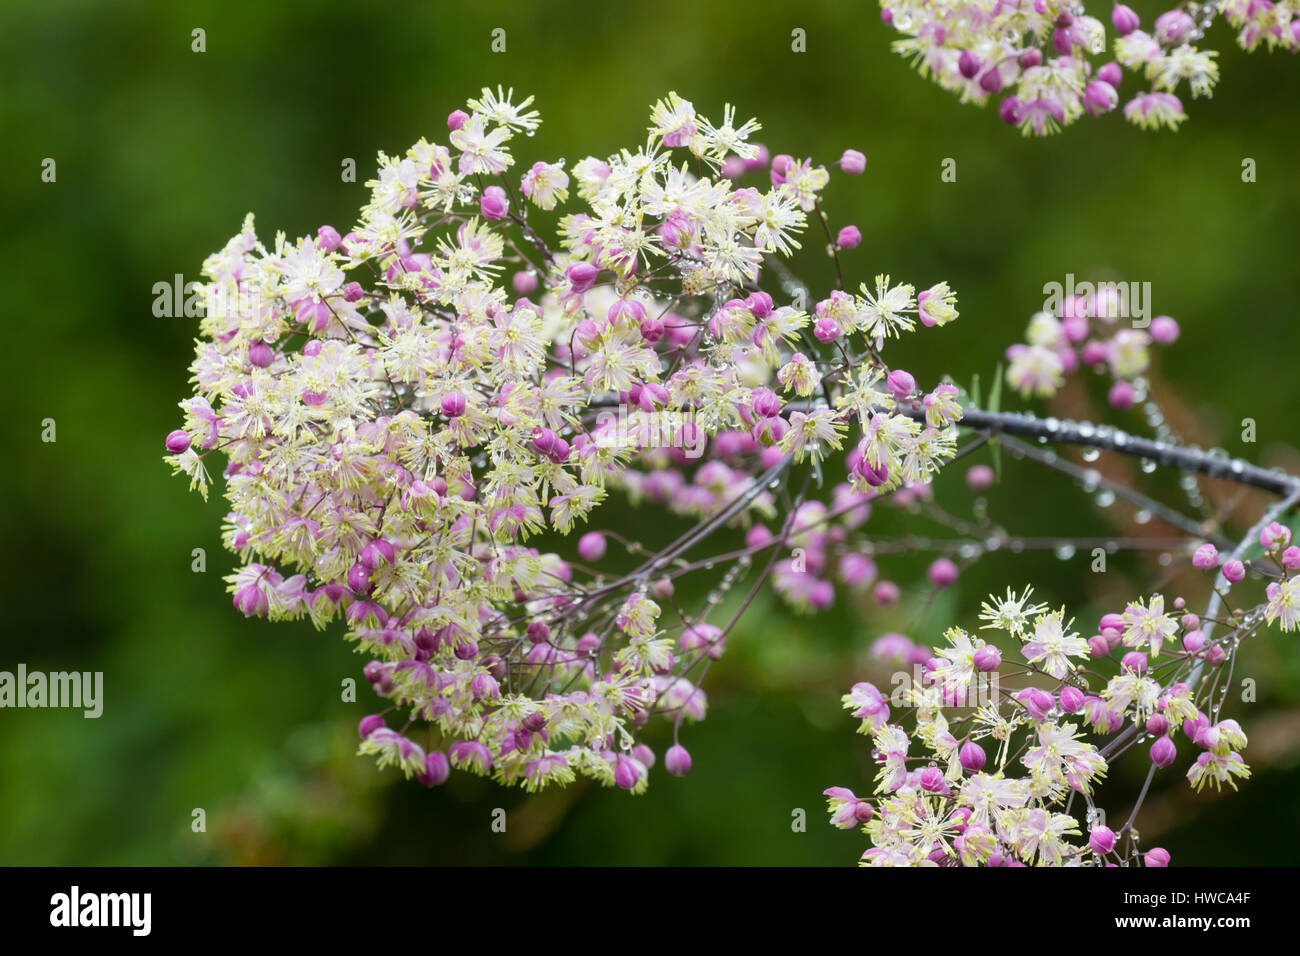 Pink buds open to a mass of creamy stamens in the flowers of the tall meadow rue, Thalictrum 'Elin' Stock Photo